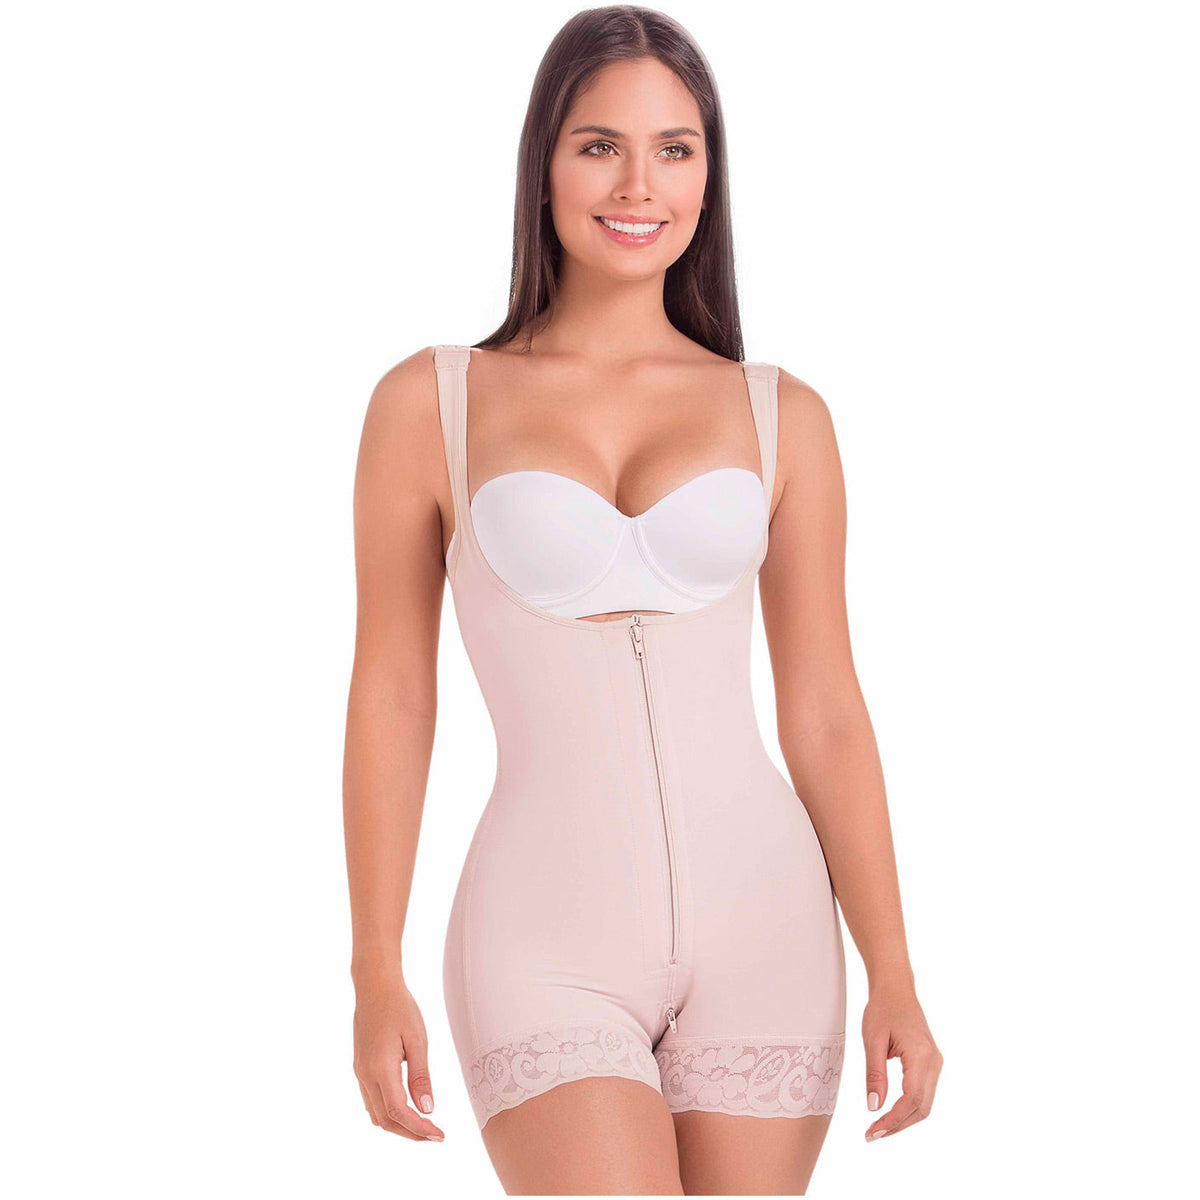 Fajas MariaE 9831 | Mid Thigh Full Body Shaper | Firm Compression Postpartum Bodysuit | Butt Lifter Open Bust